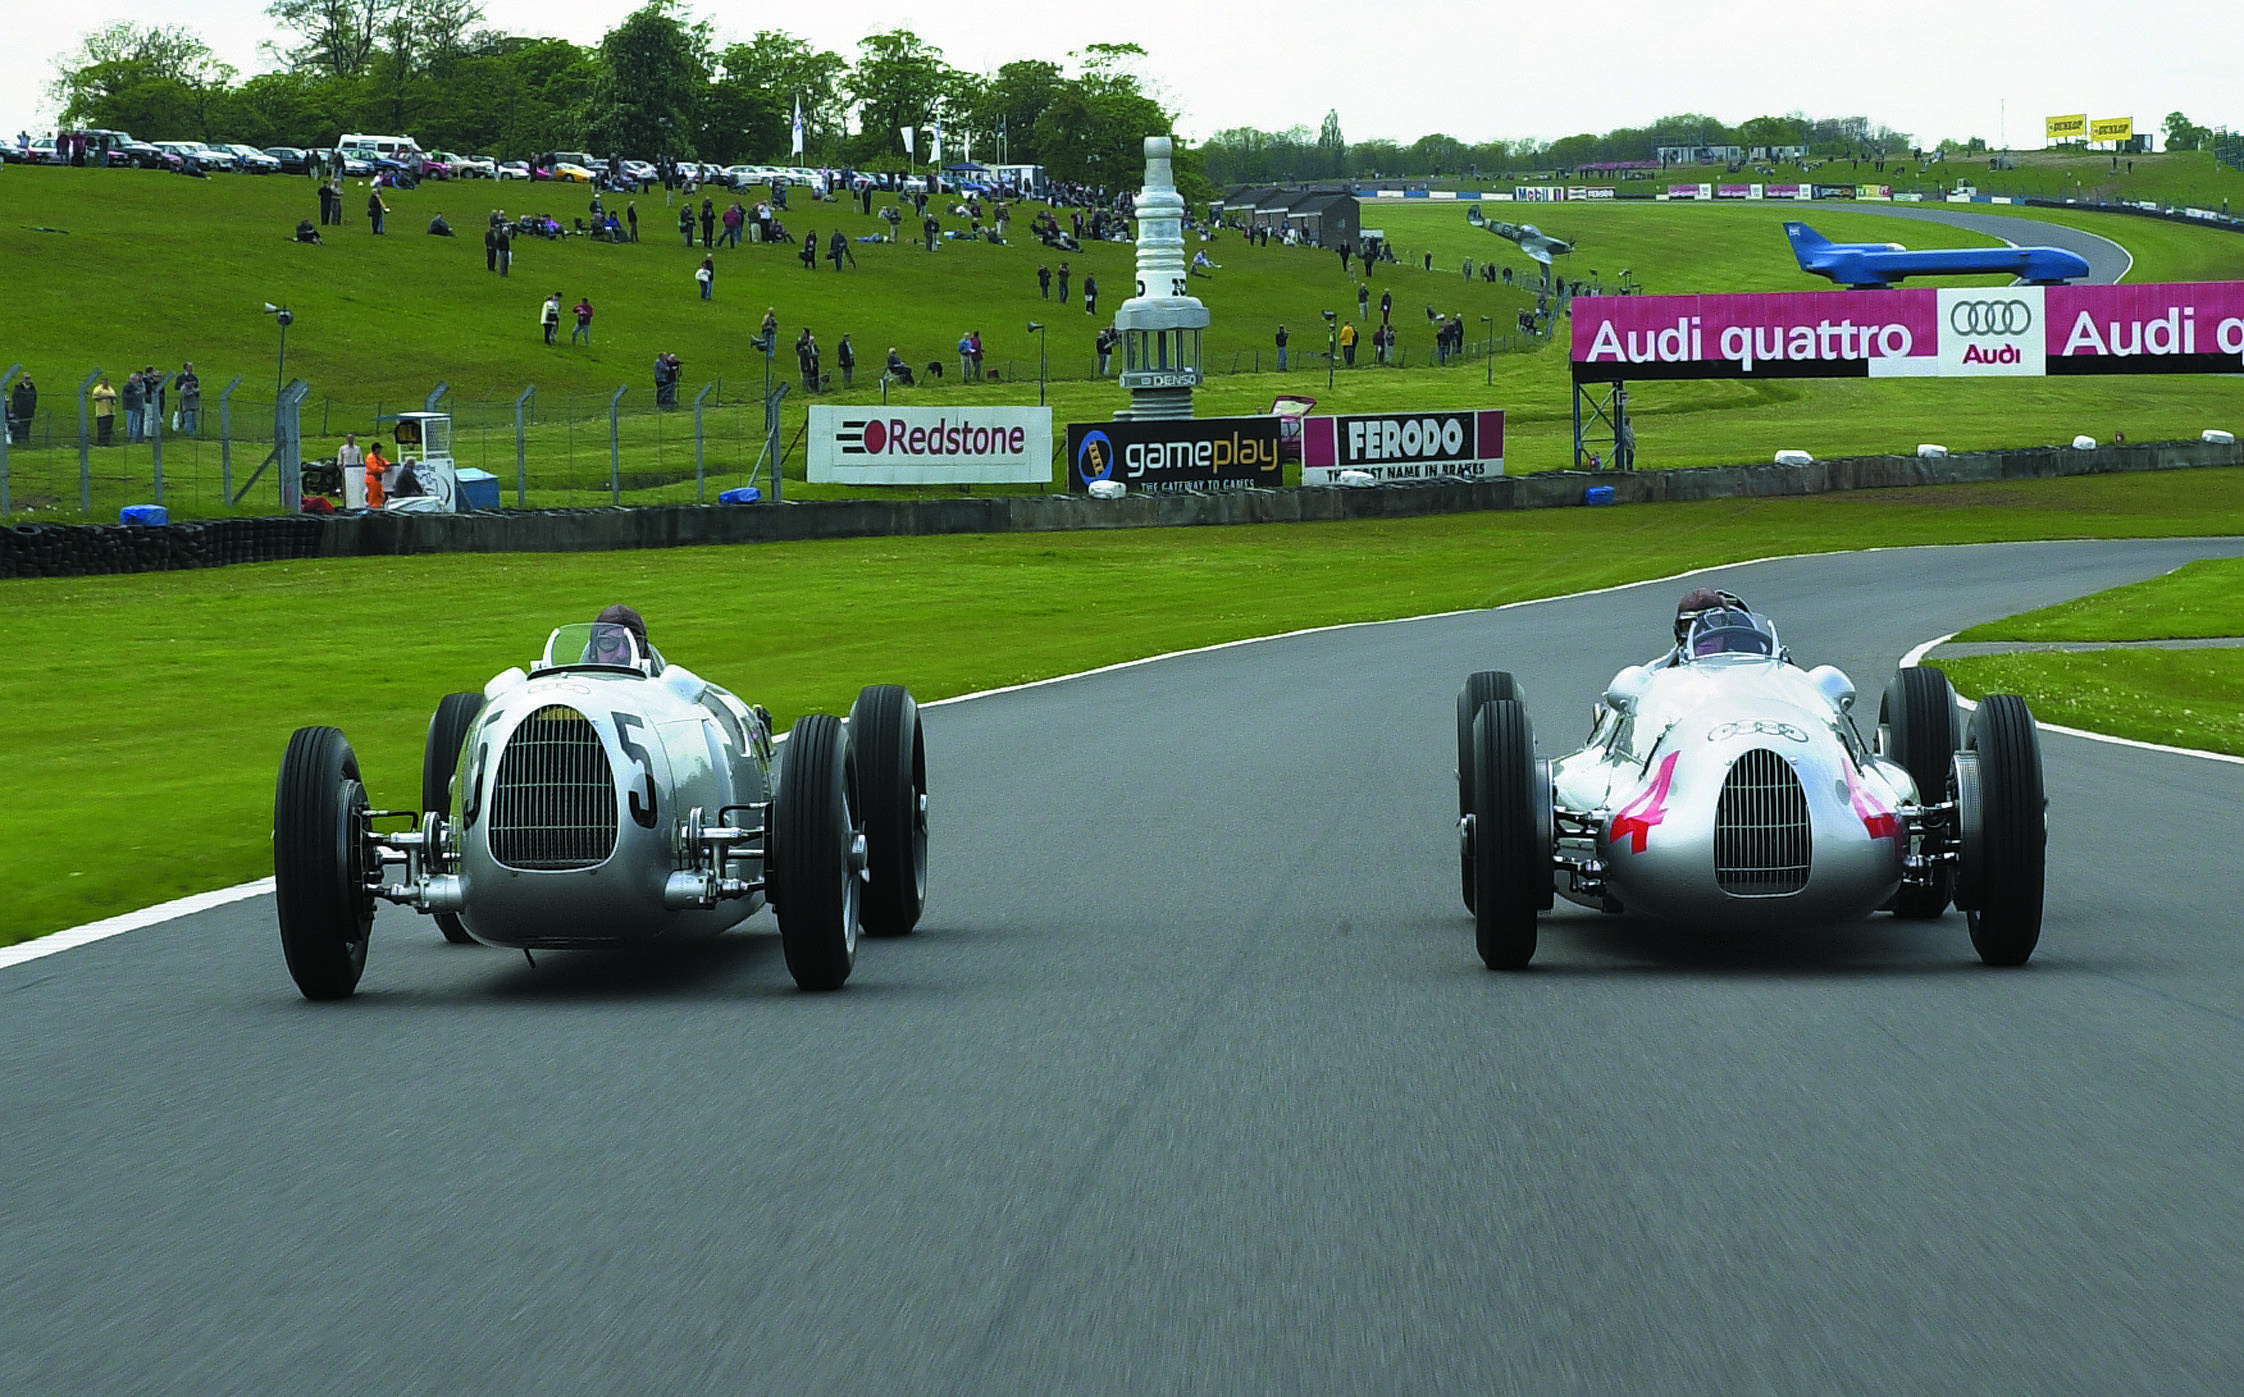 Return to the legendary Donington Park race track in the Midlands of Great Britain: On 19 and 20 May 2001 there started an Auto Union Type C 16-cylinder car (left) and an Auto Union Type D 12-cylinder car (right)